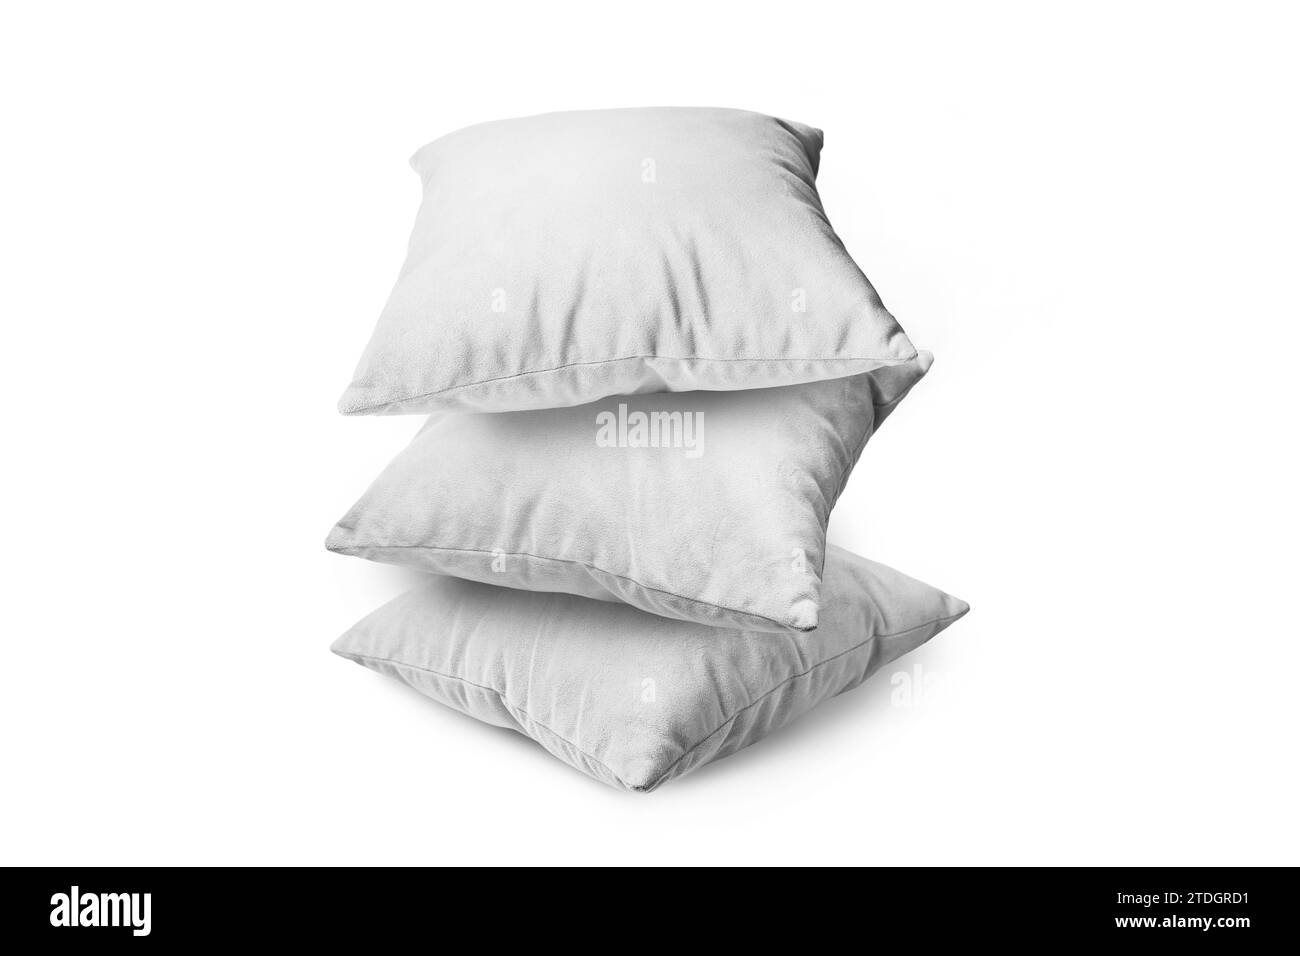 Stack of white pillows isolated on white background. Pile of  decorative cushions for sleeping and resting, home interior, house decor. Stock Photo